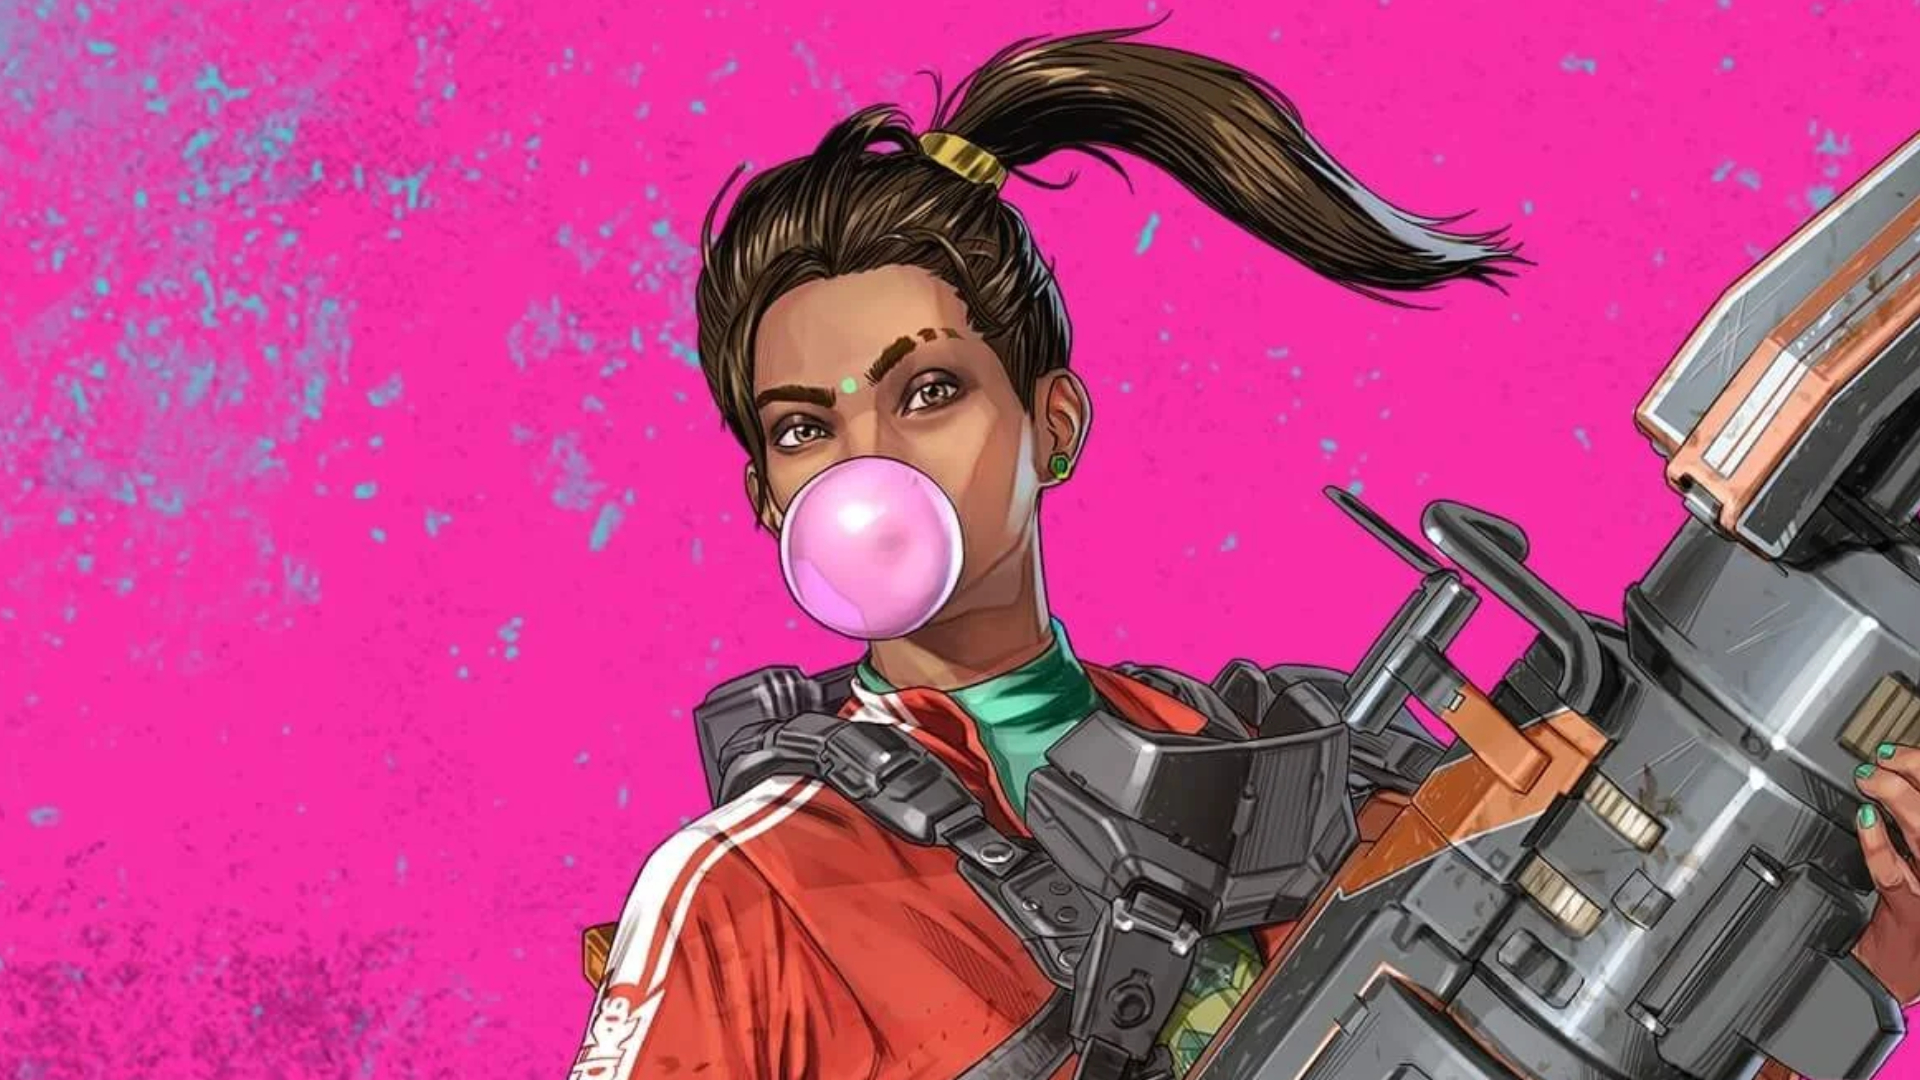 Nvidia fixes stability issues in Apex Legends, Halo Infinite, and more